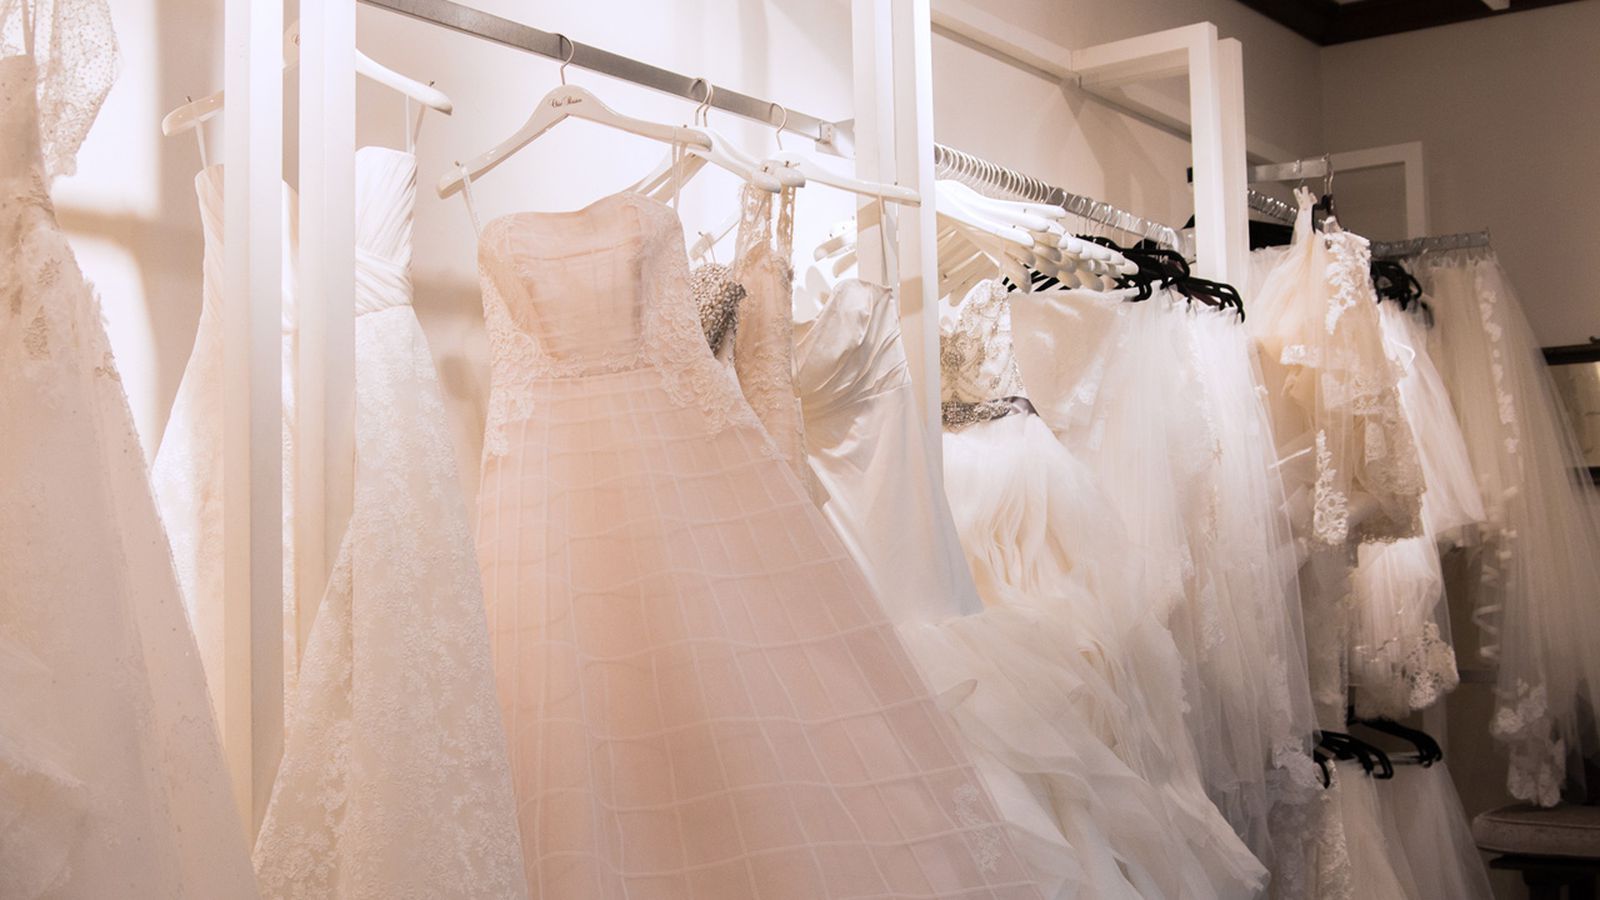 GLAM UP YOUR BRIDAL GOWN HANGERS WITH THESE BREATHTAKING DIY IDEAS